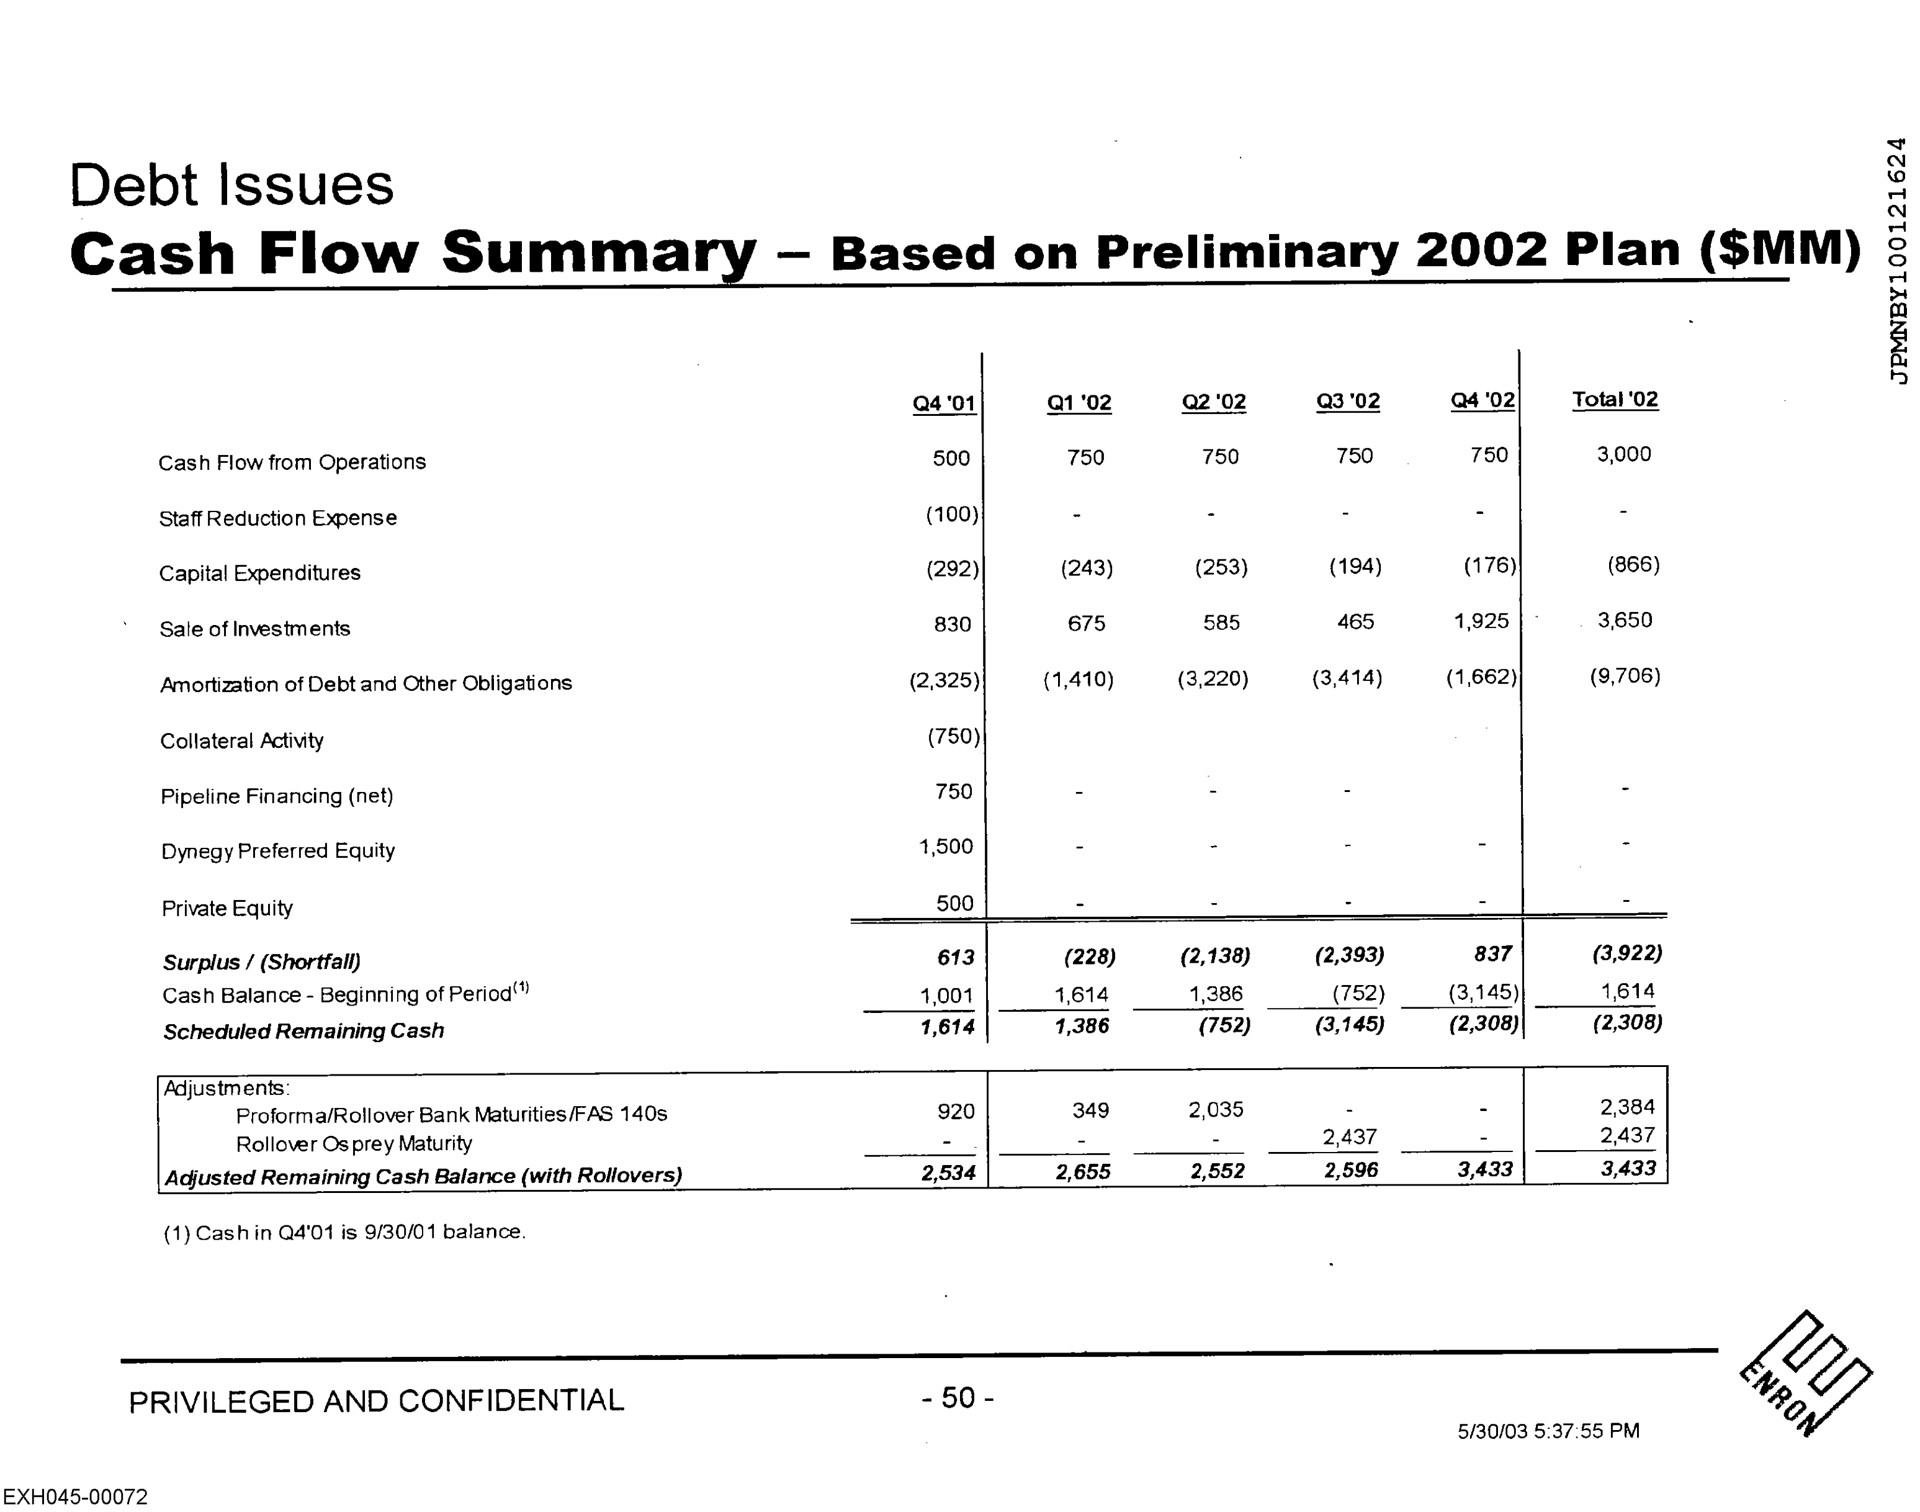 debt issues cash flow summary based on preliminary plan | Enron